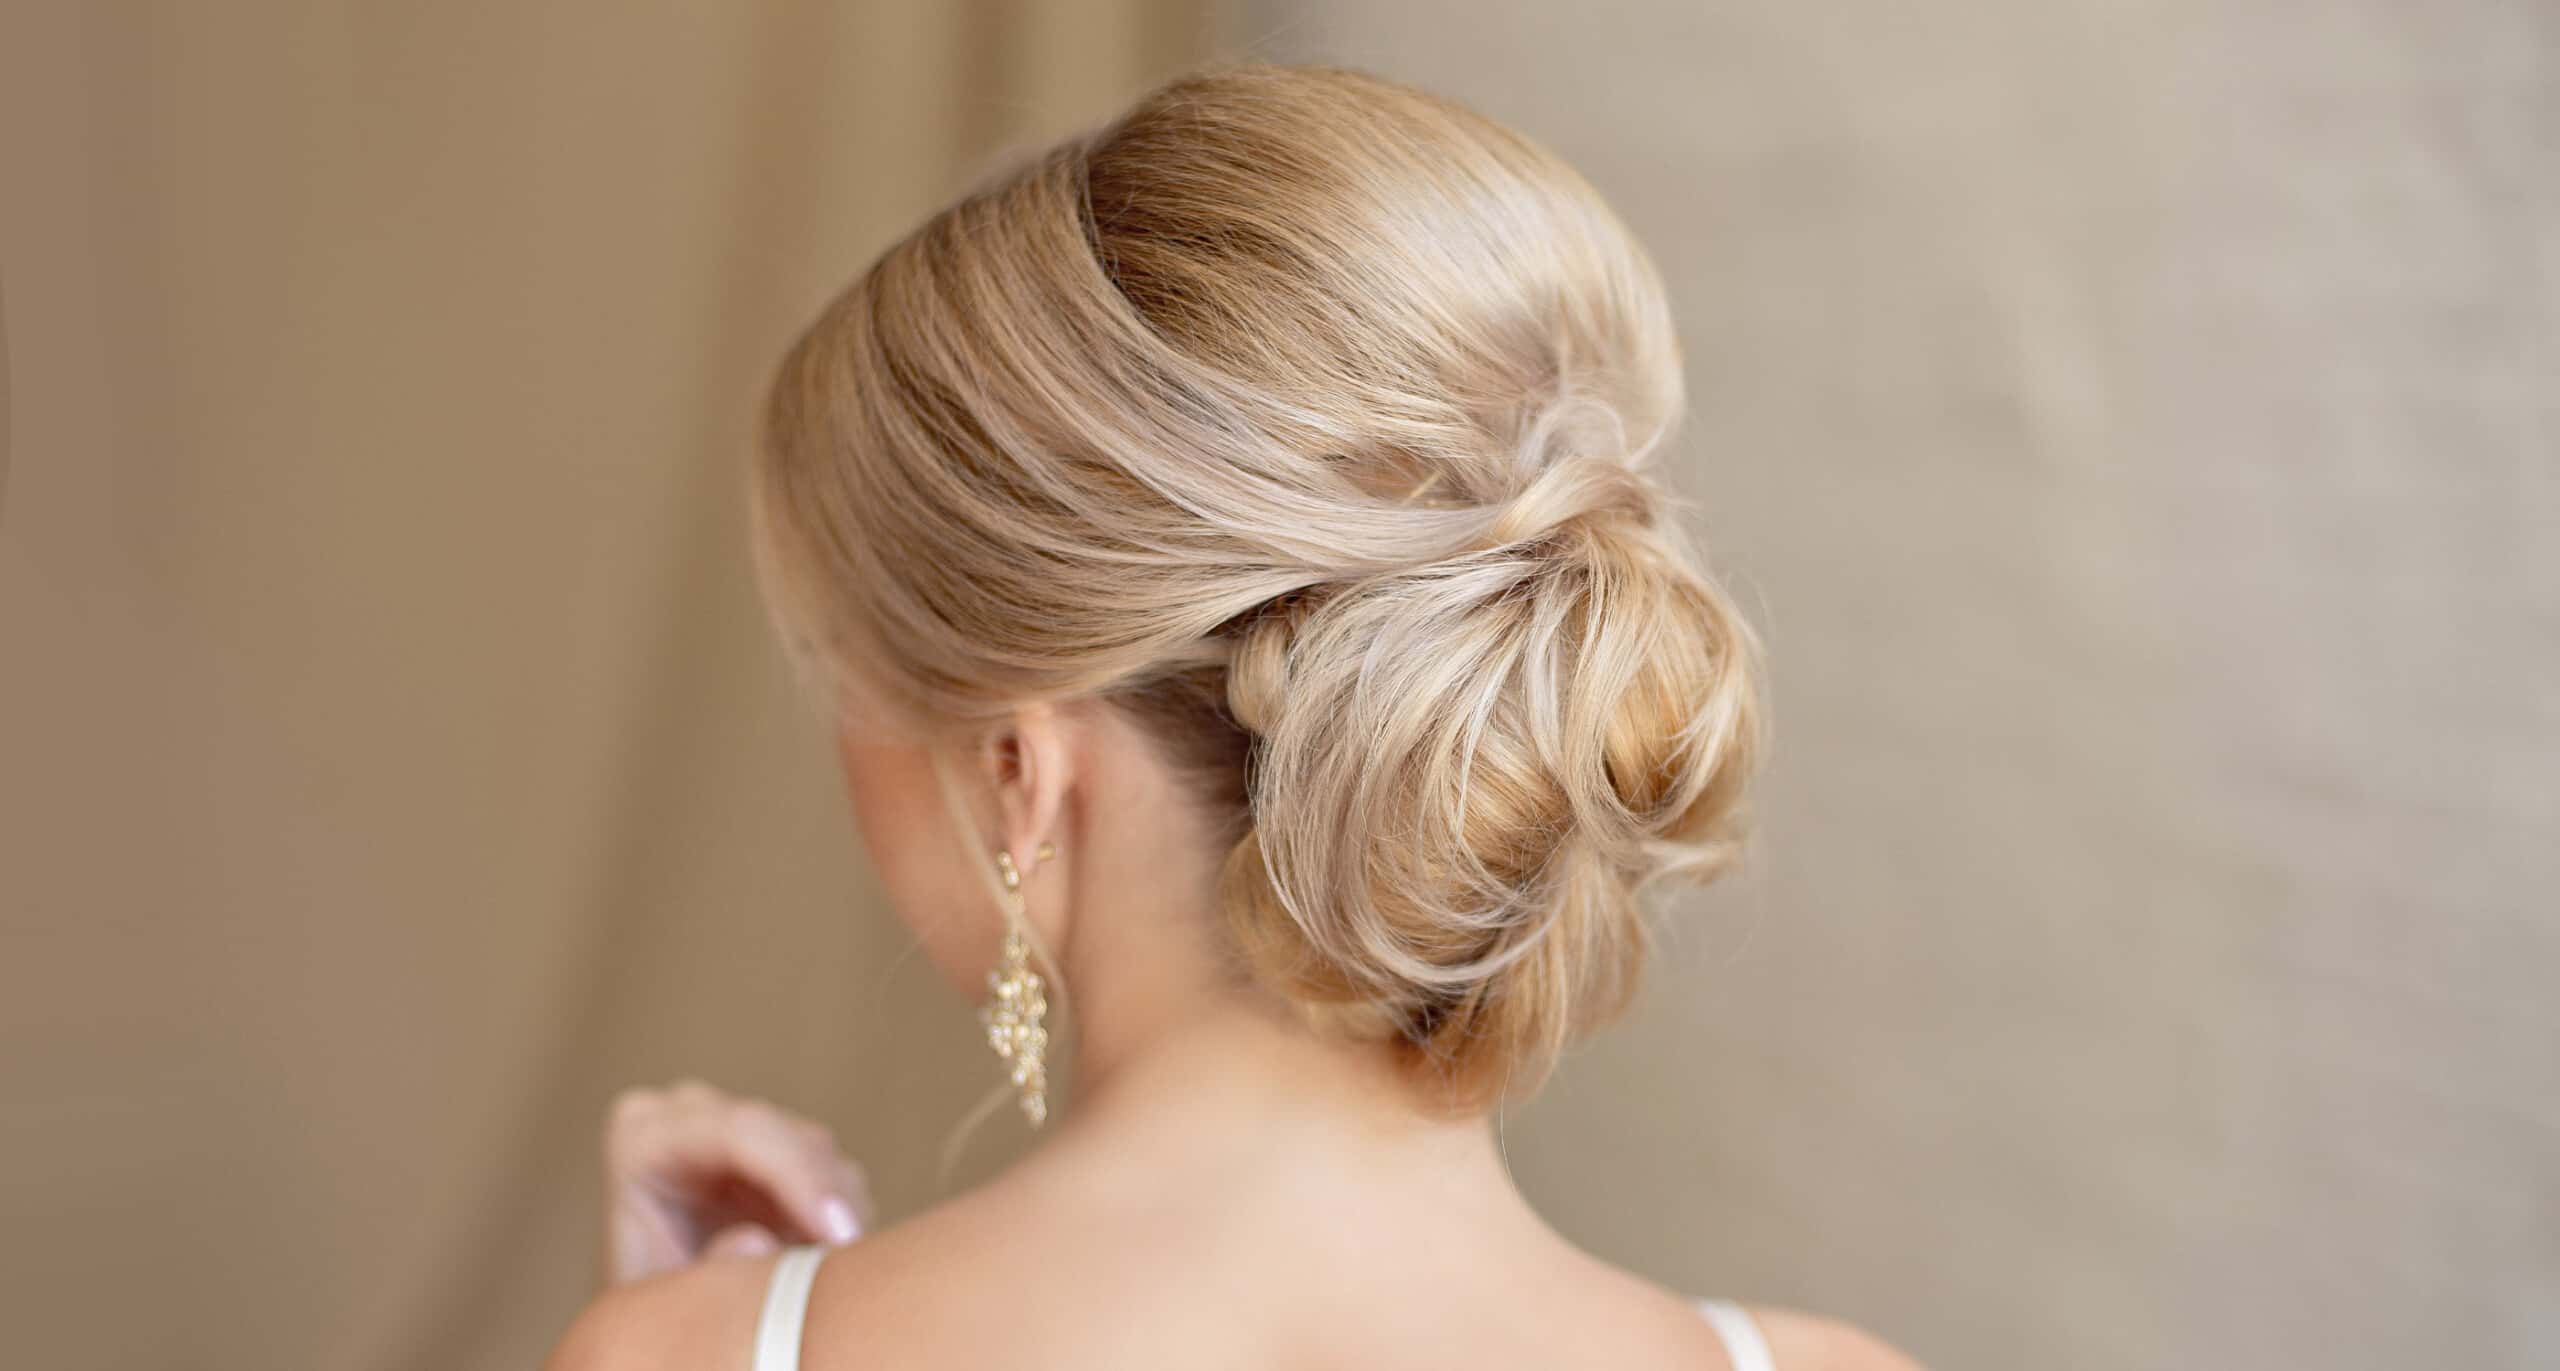 Cute Updo Hairstyles with Side Swept Bangs | Bangs, Cute Updo and ... |  Wedding hair side, Long hair styles, Hairstyle